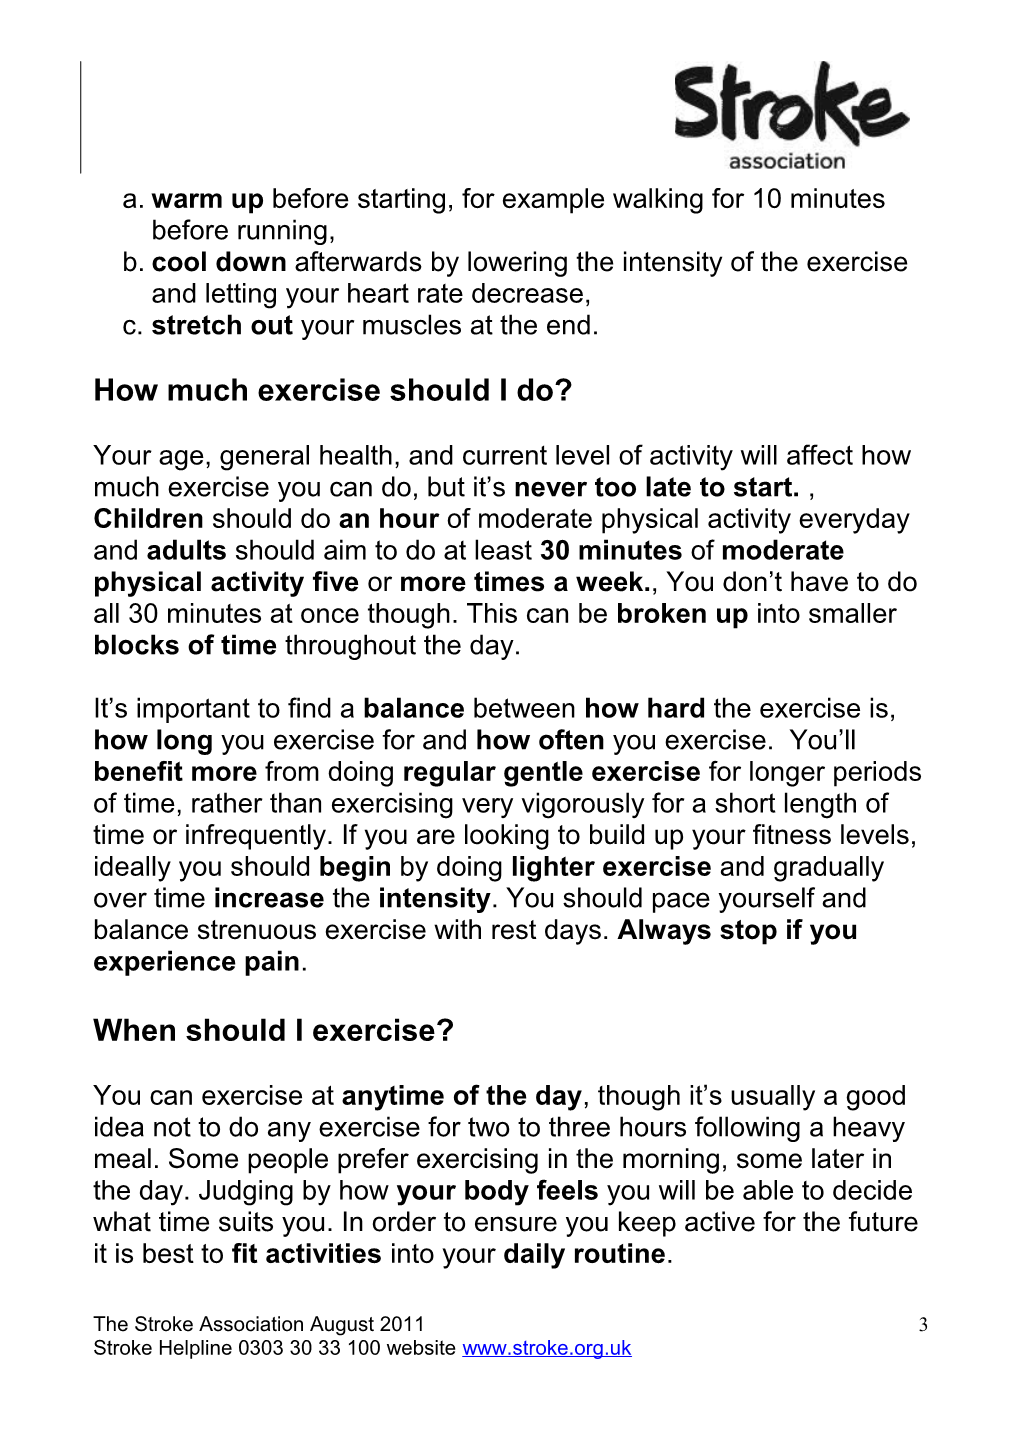 R07 Exercise and Stroke